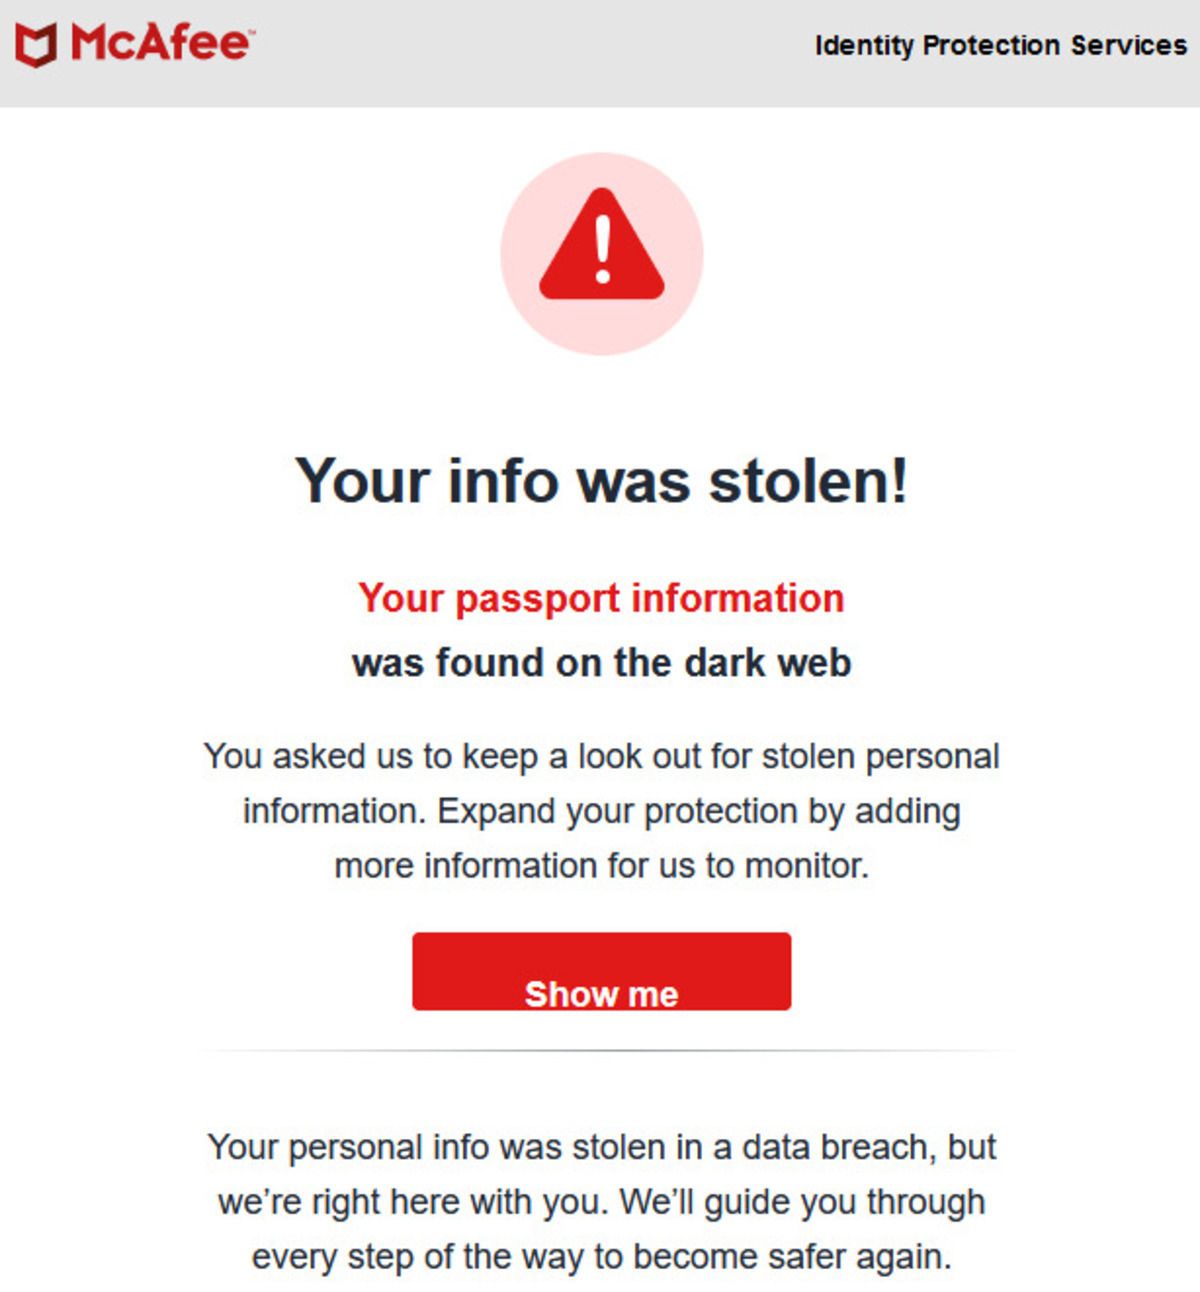 What Does It Mean When Mcafee Says Your Info Is On The Dark Web?